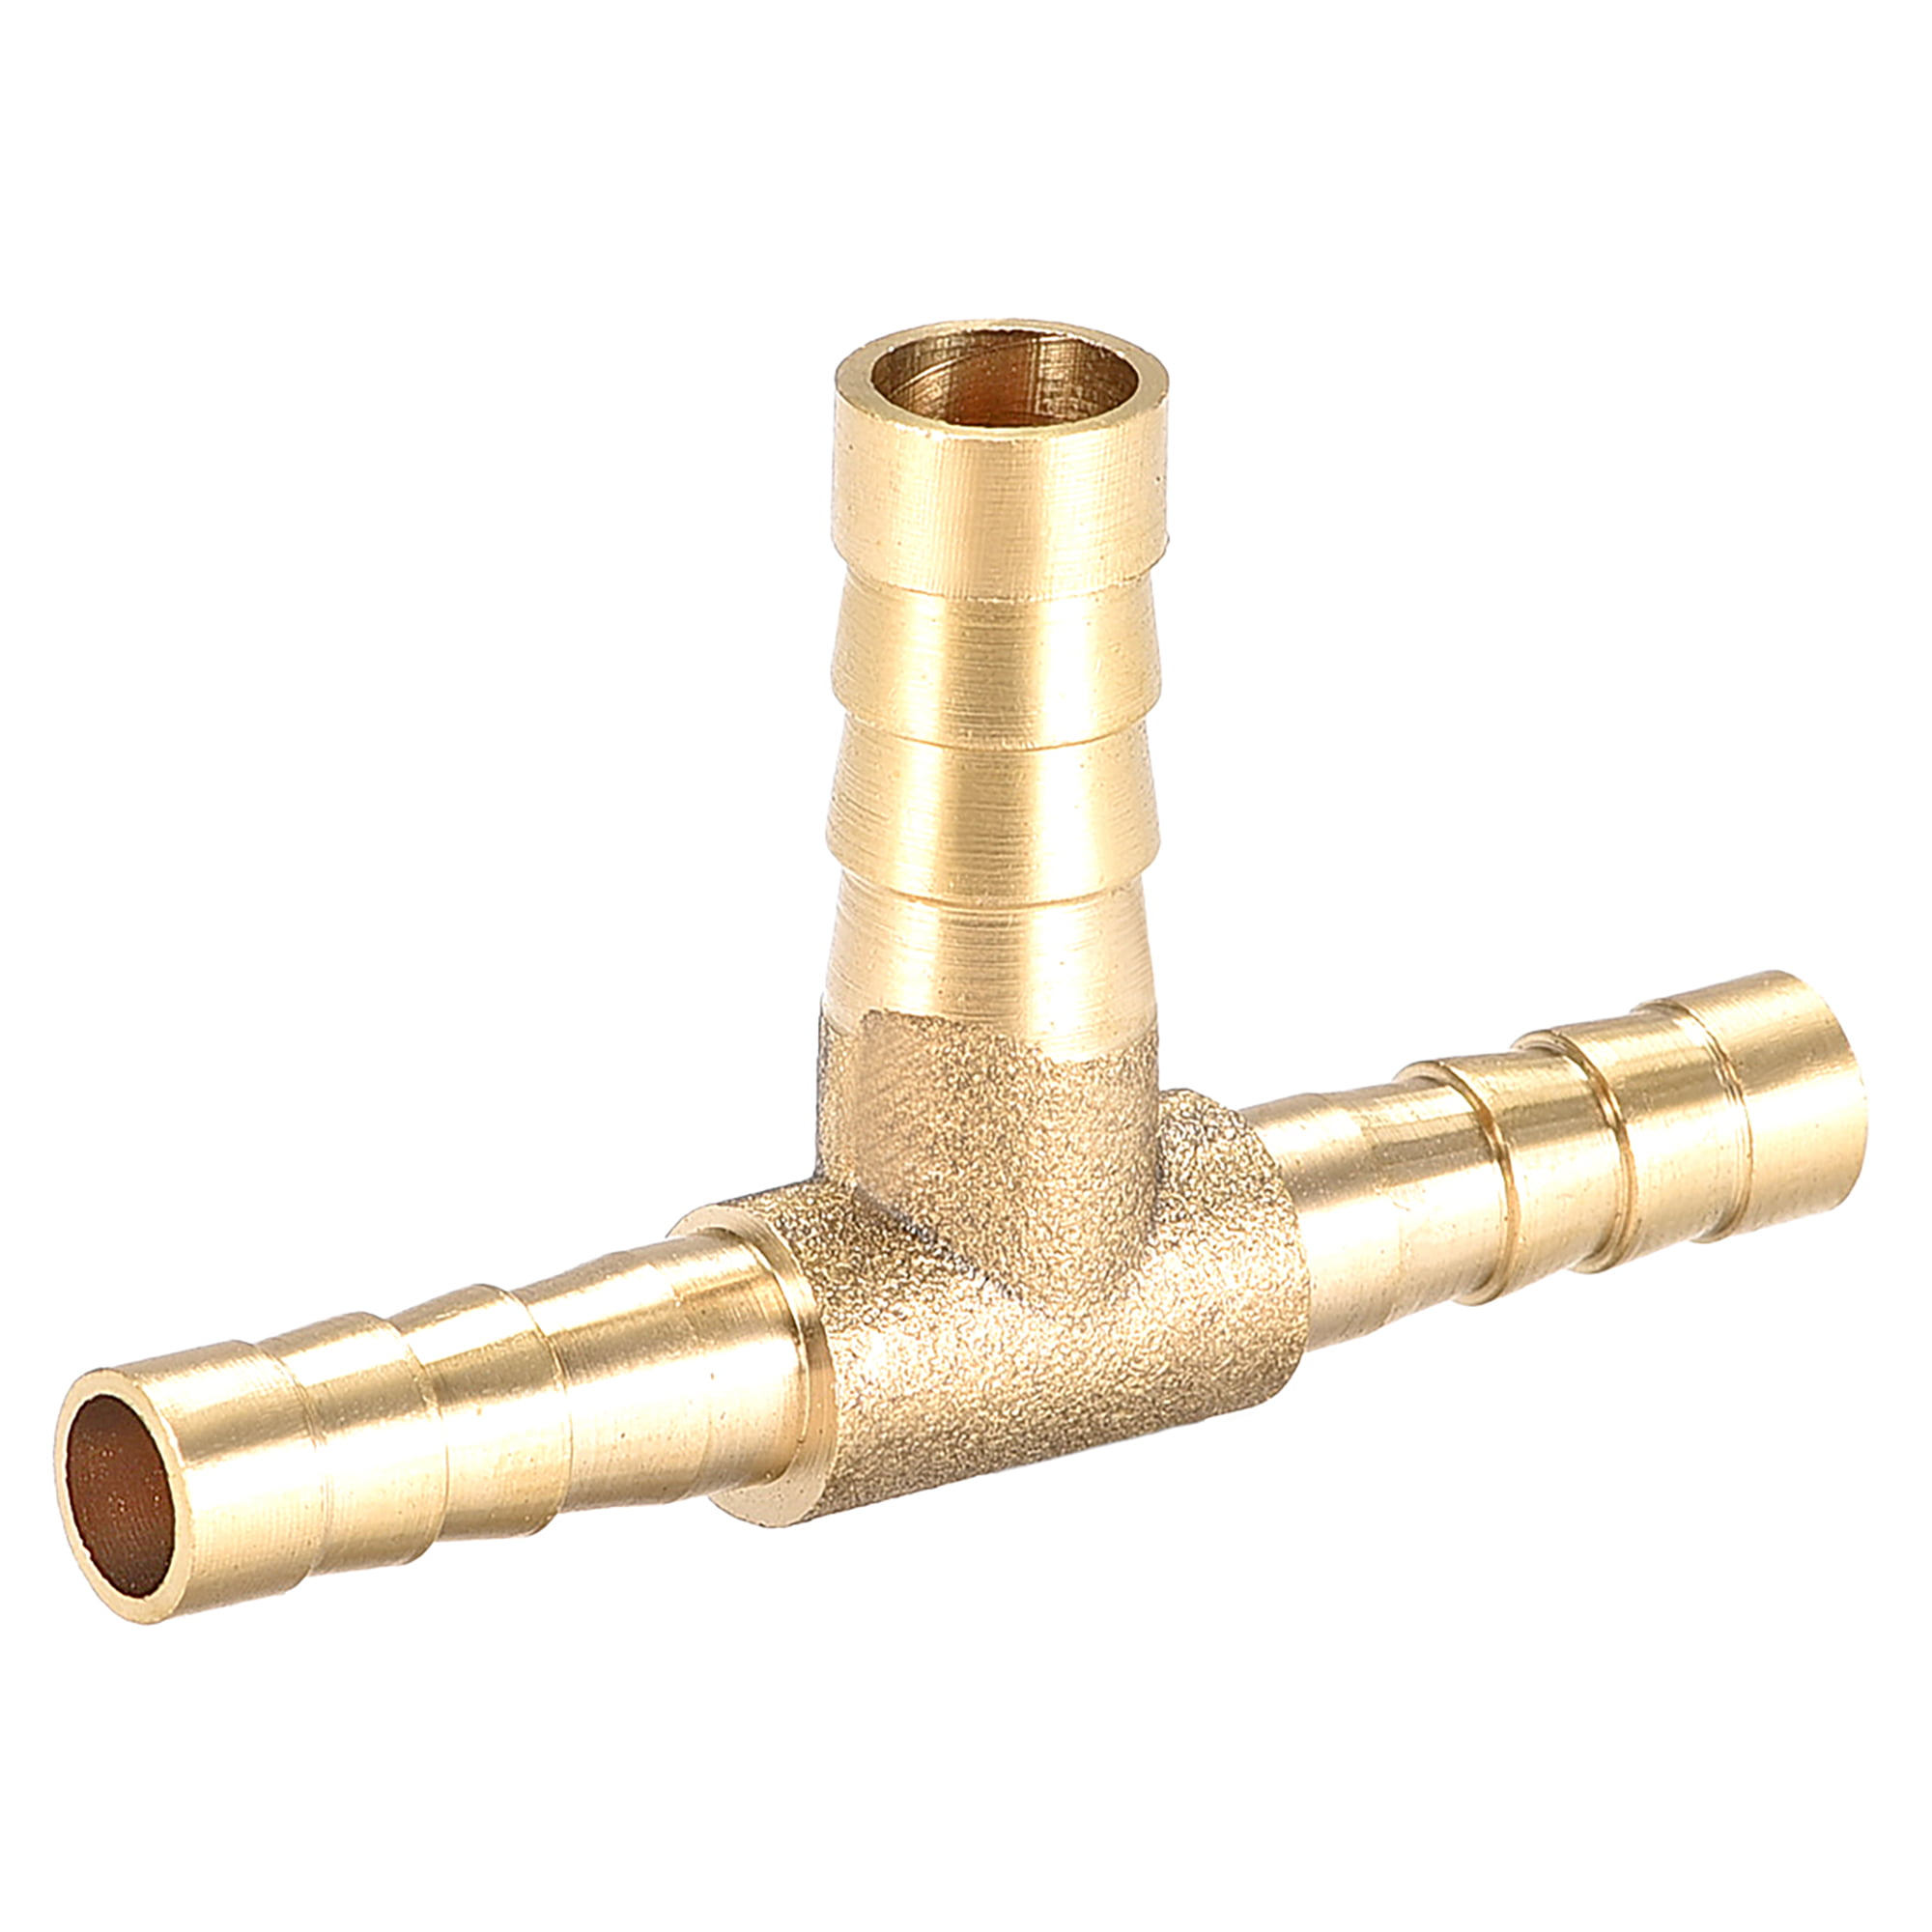 Brass Barb Reducing Tee Reducer Fitting For Hose ID 1/4" X 1/8" Water Gas Fuel 